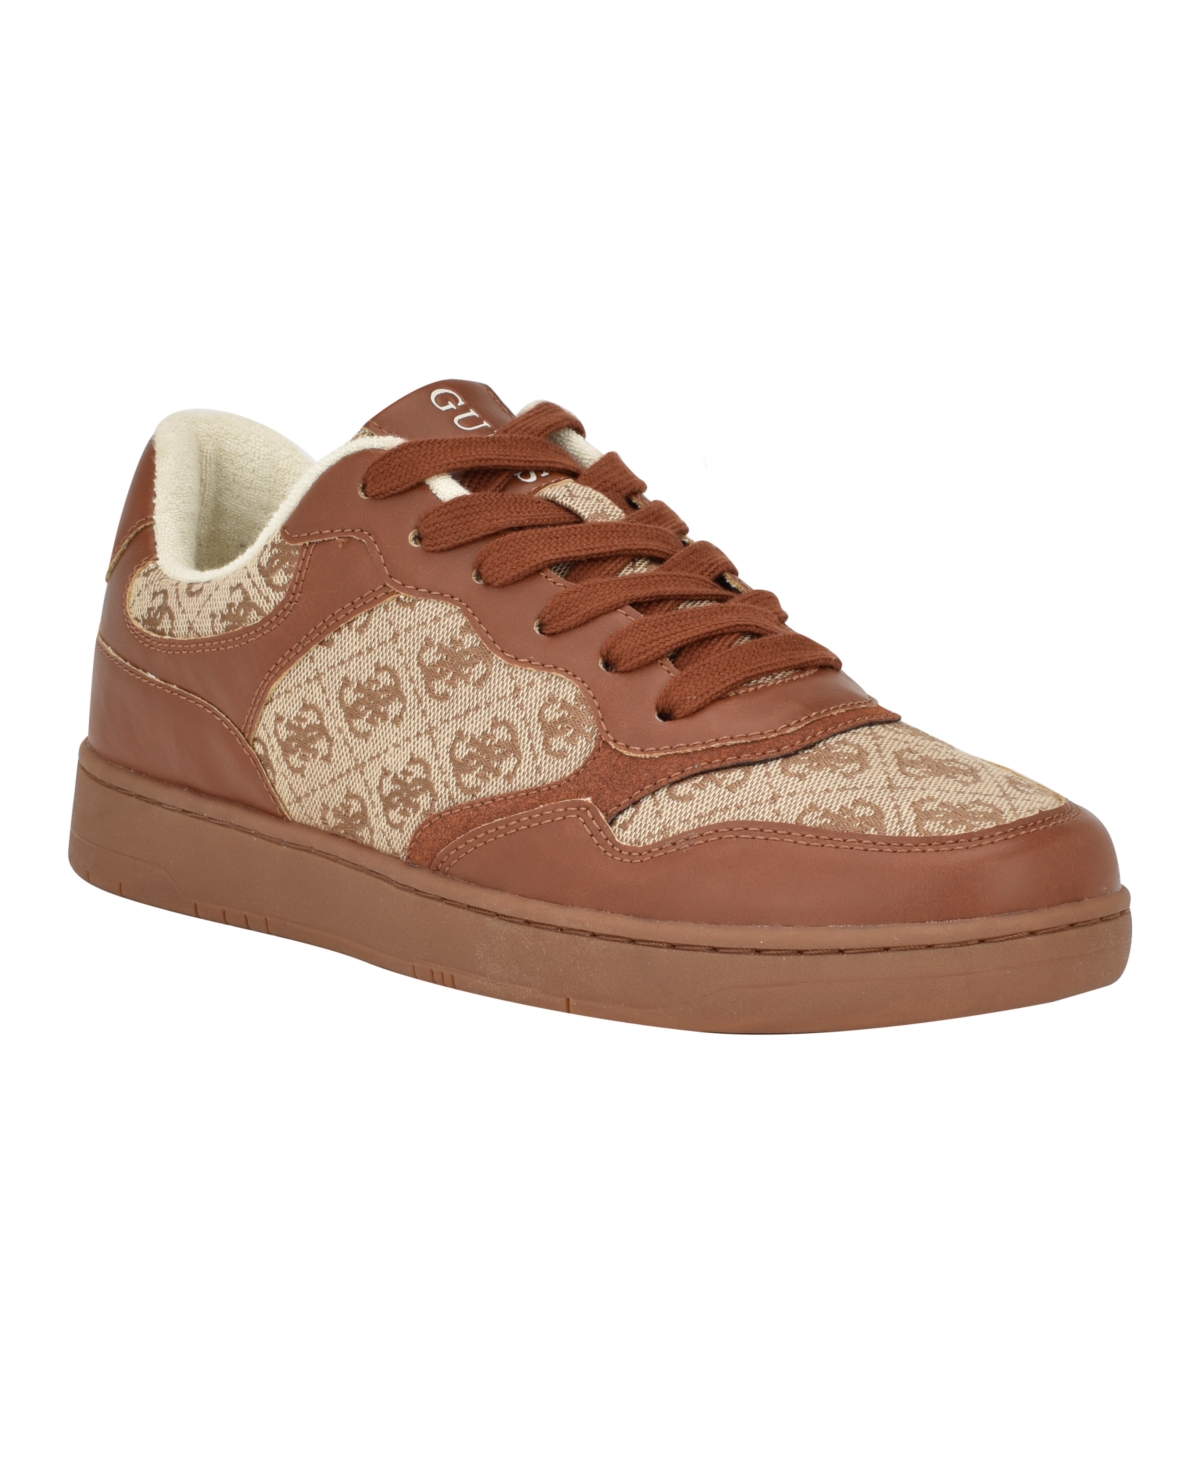 Guess Men's Tippo Low Top Lace Up Fashion Sneakers In Cognac Logo Multi